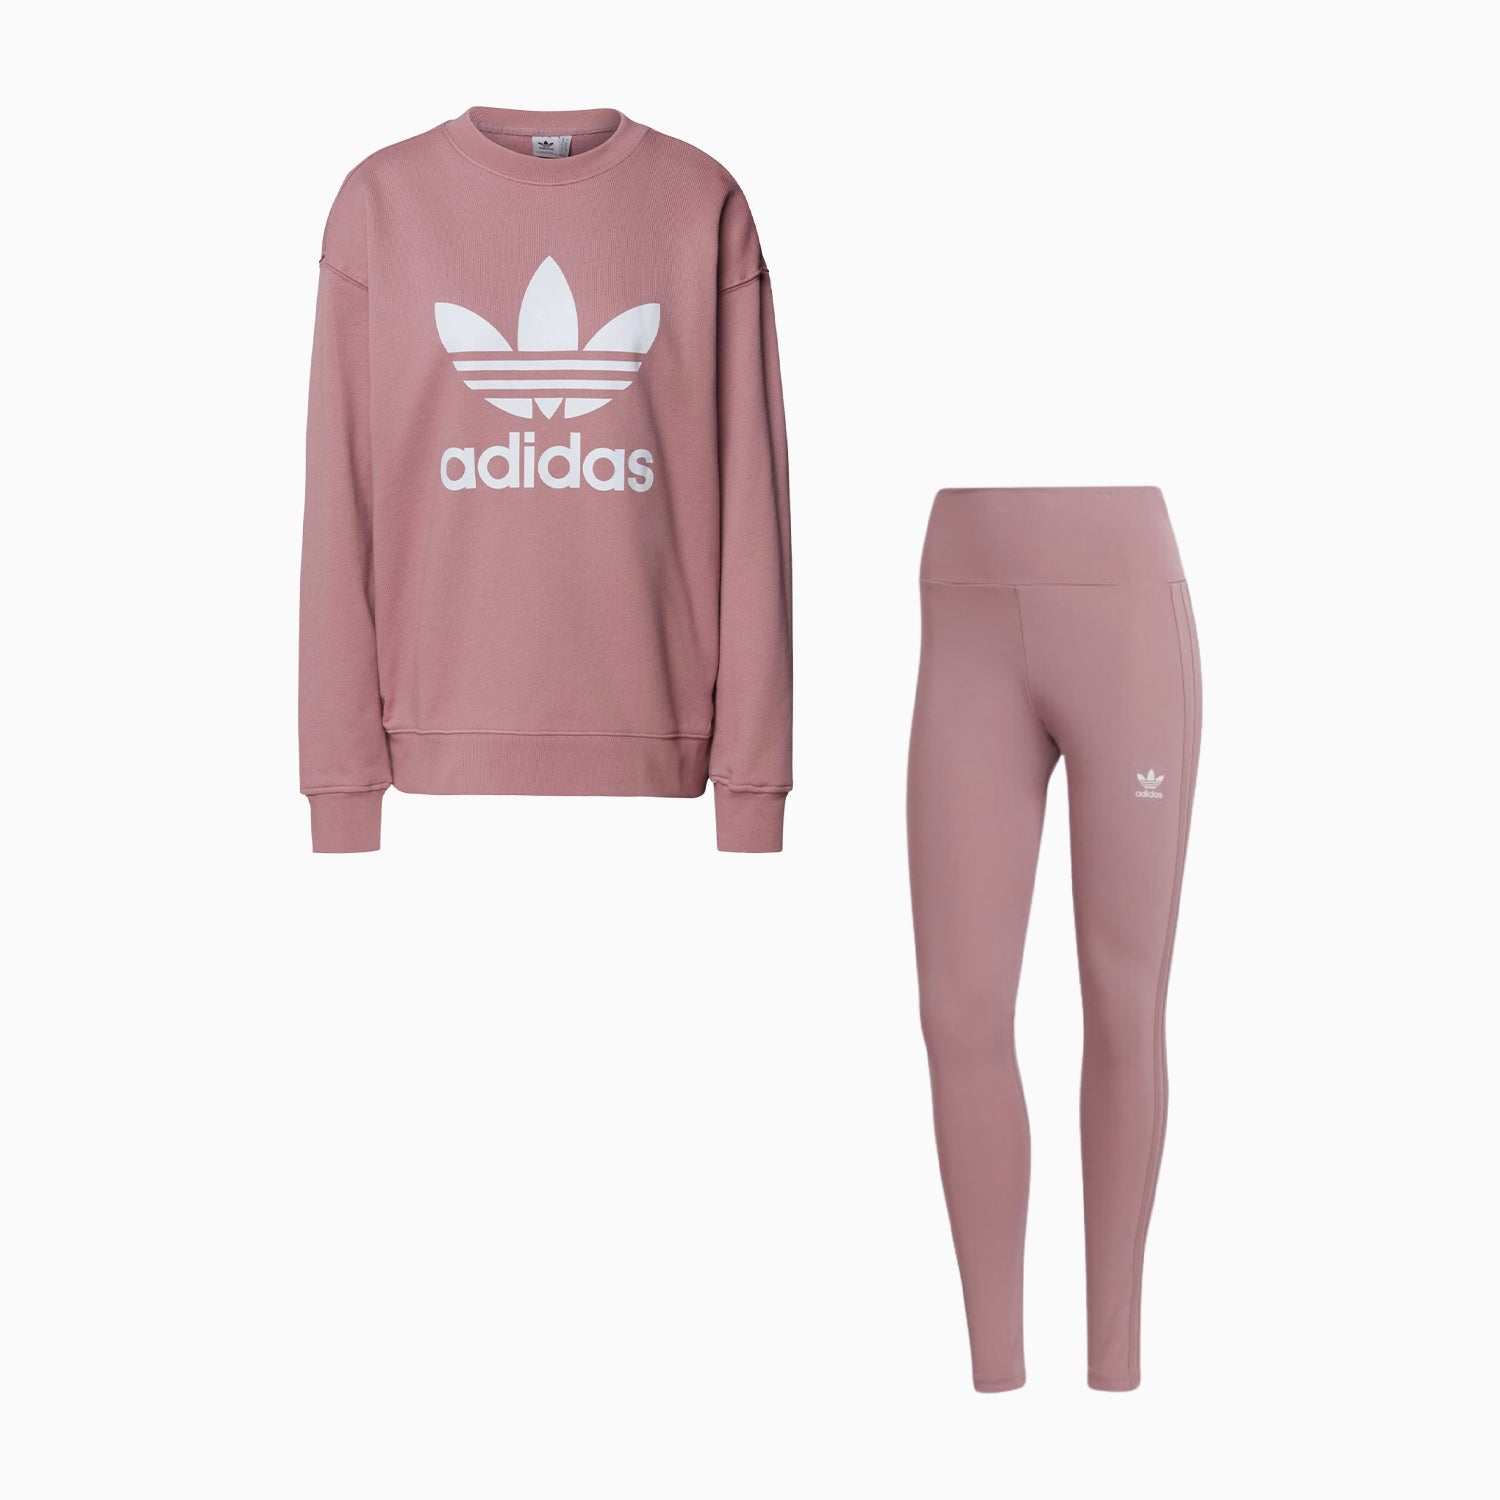 adidas-womens-trefoil-3-stripes-outfit-he9536-hc2020